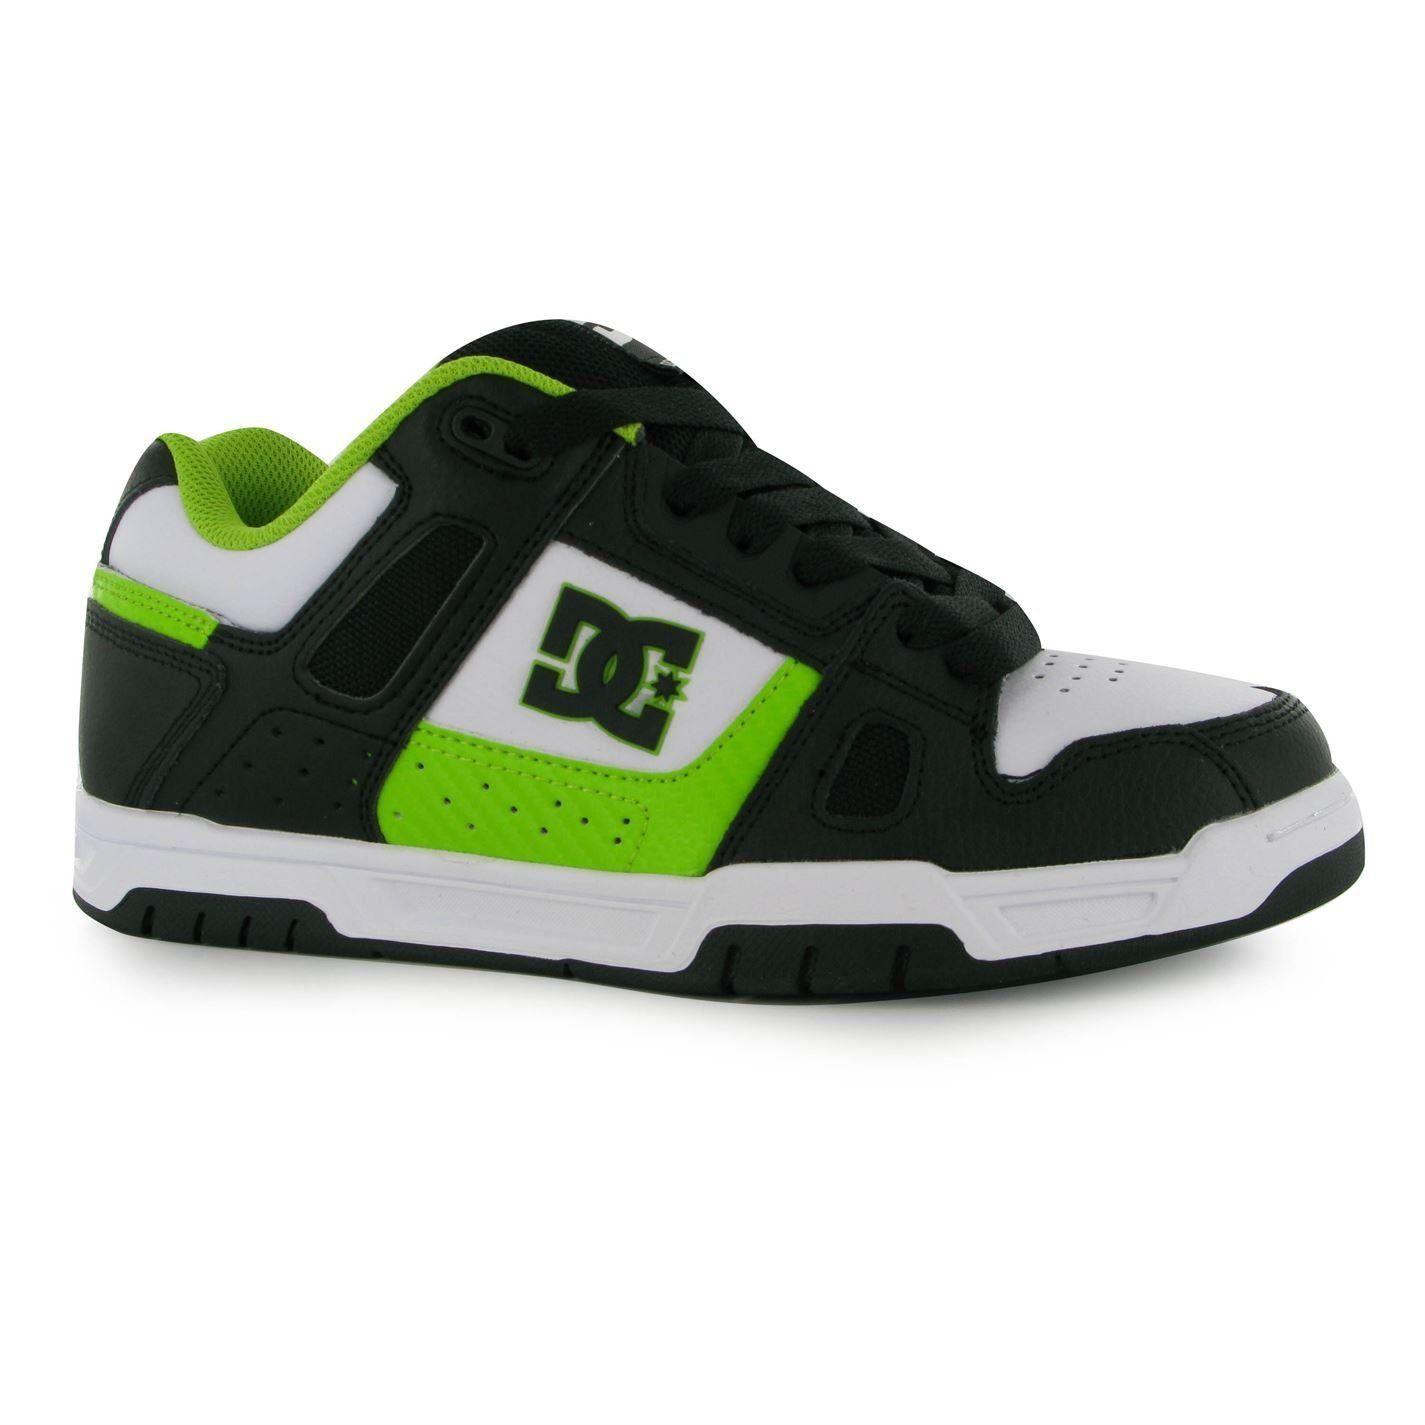 Black and White DC Shoes Logo - DC Stag Skate Shoes Mens Black/White/Green Casual Trainers Sneakers ...